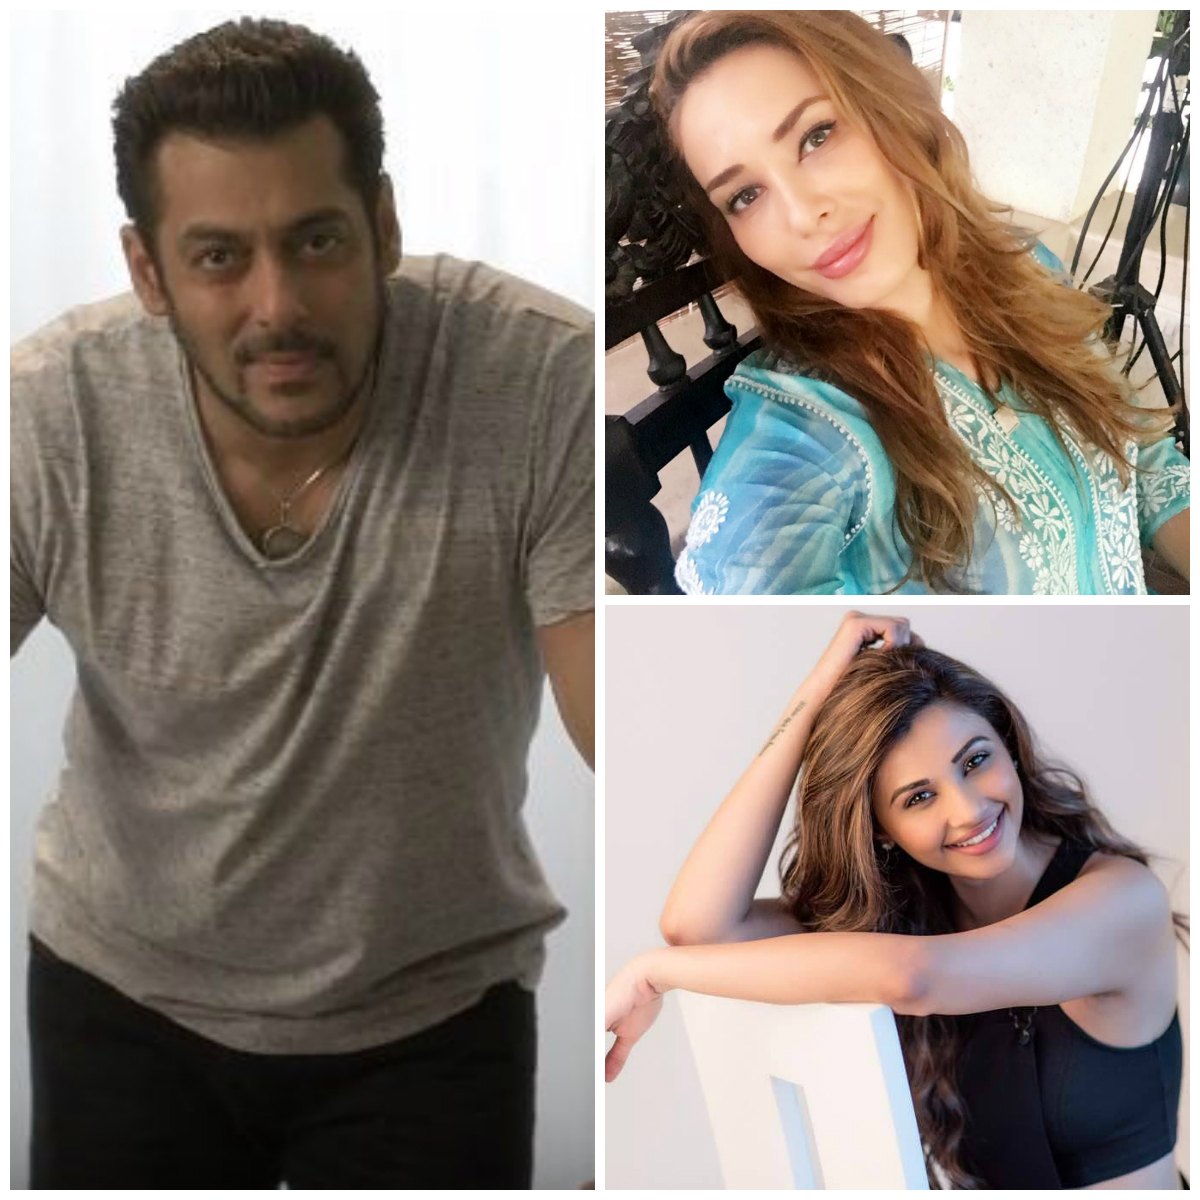 Did Iulia want to present an award as Salman Khan’s Race 3 co-star Daisy is giving one too at Masala Awards?